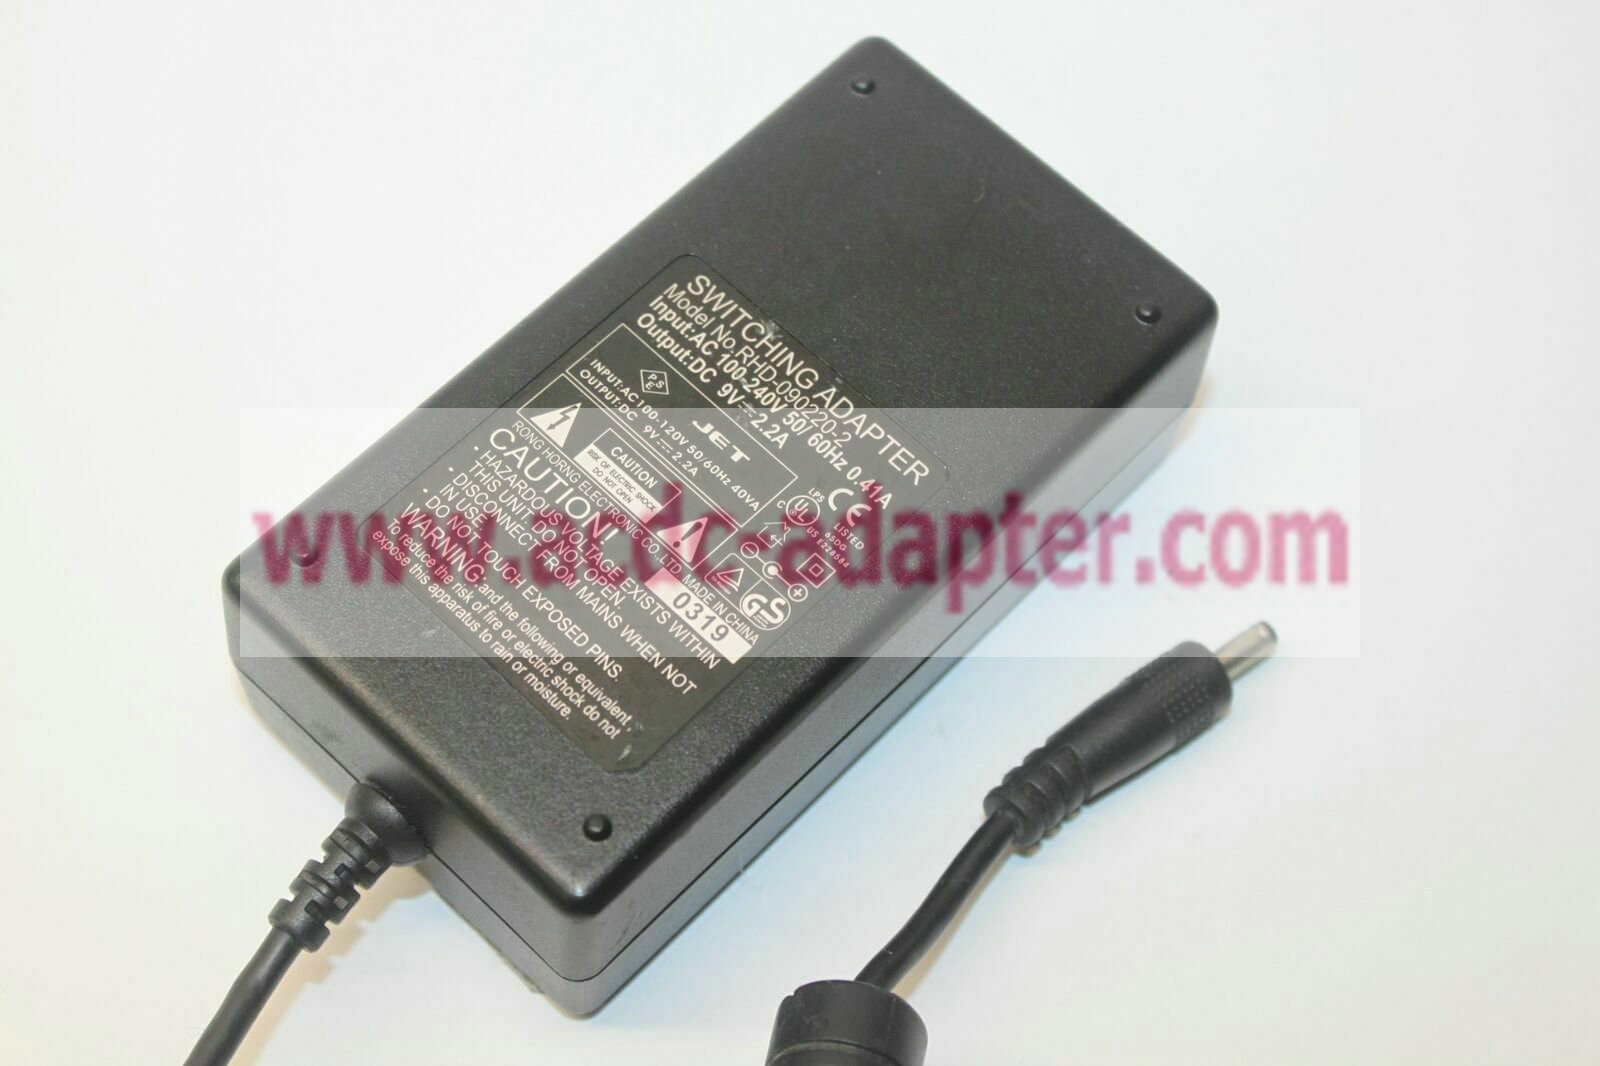 NEW DC 9V 2.2A JET RHD-090220-2 Switching Power Supply AC Adapter